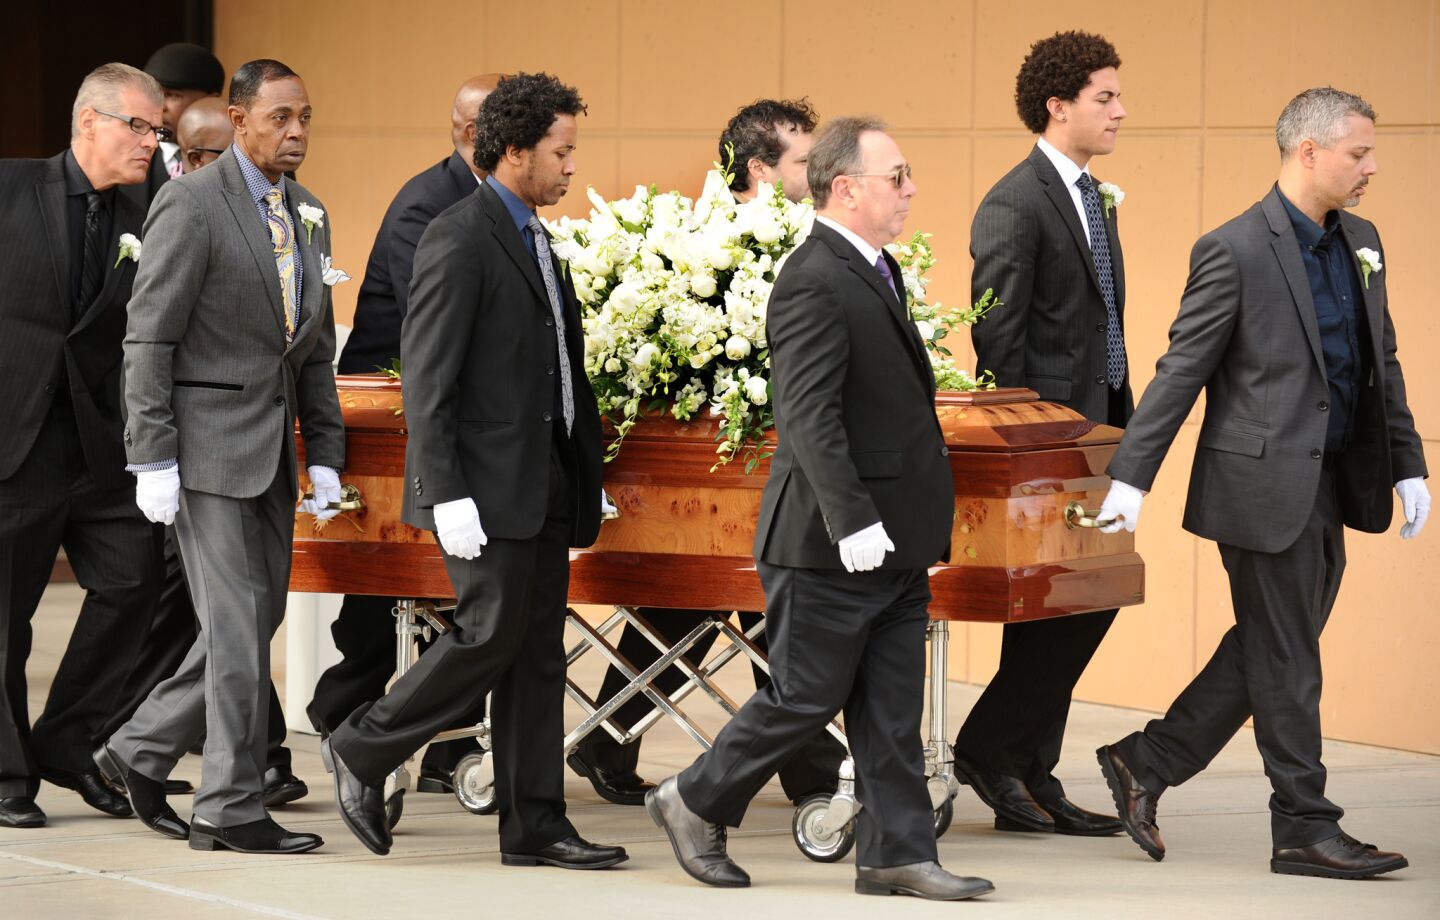 The casket of singer Natalie Cole is carried out of the church.